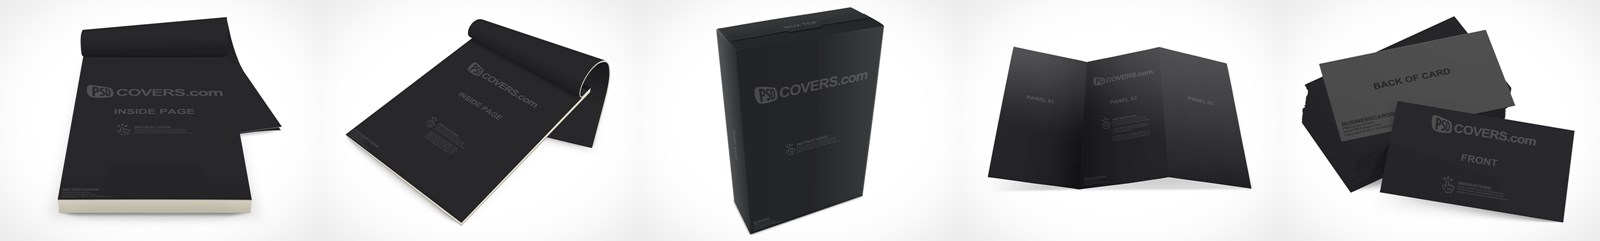 psdcovers-02